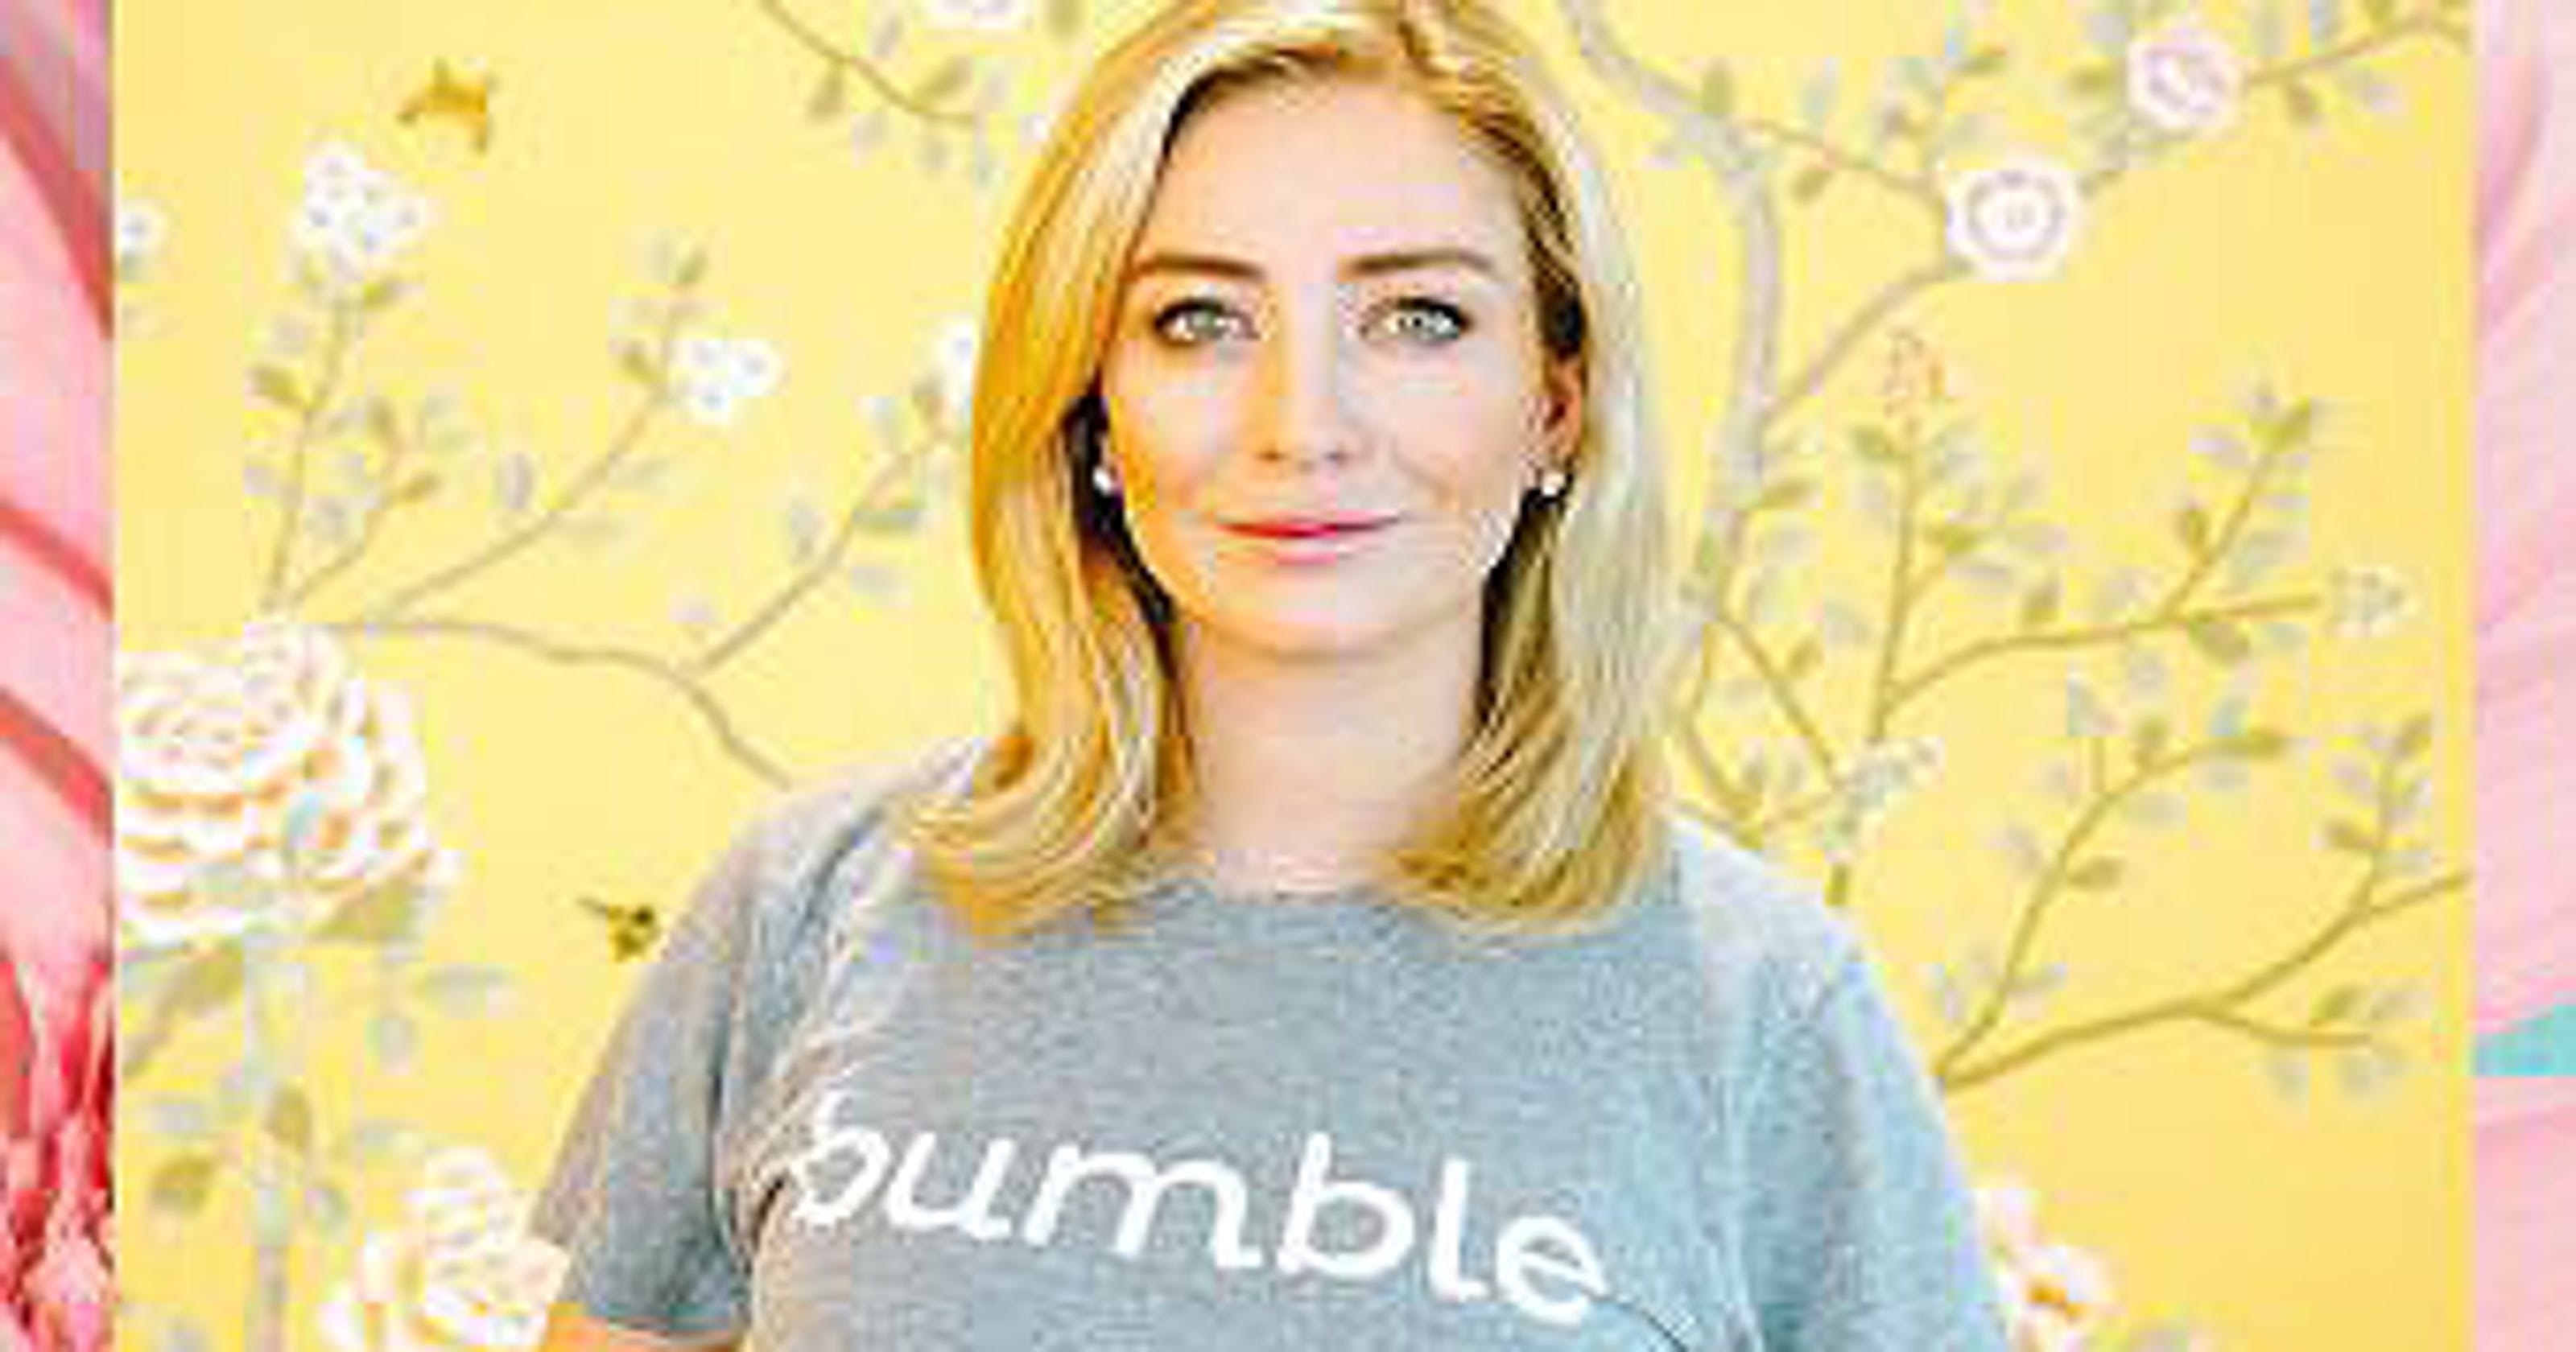 Whitney Wolfe Herd How To Build A Workplace Where Women Can Thrive